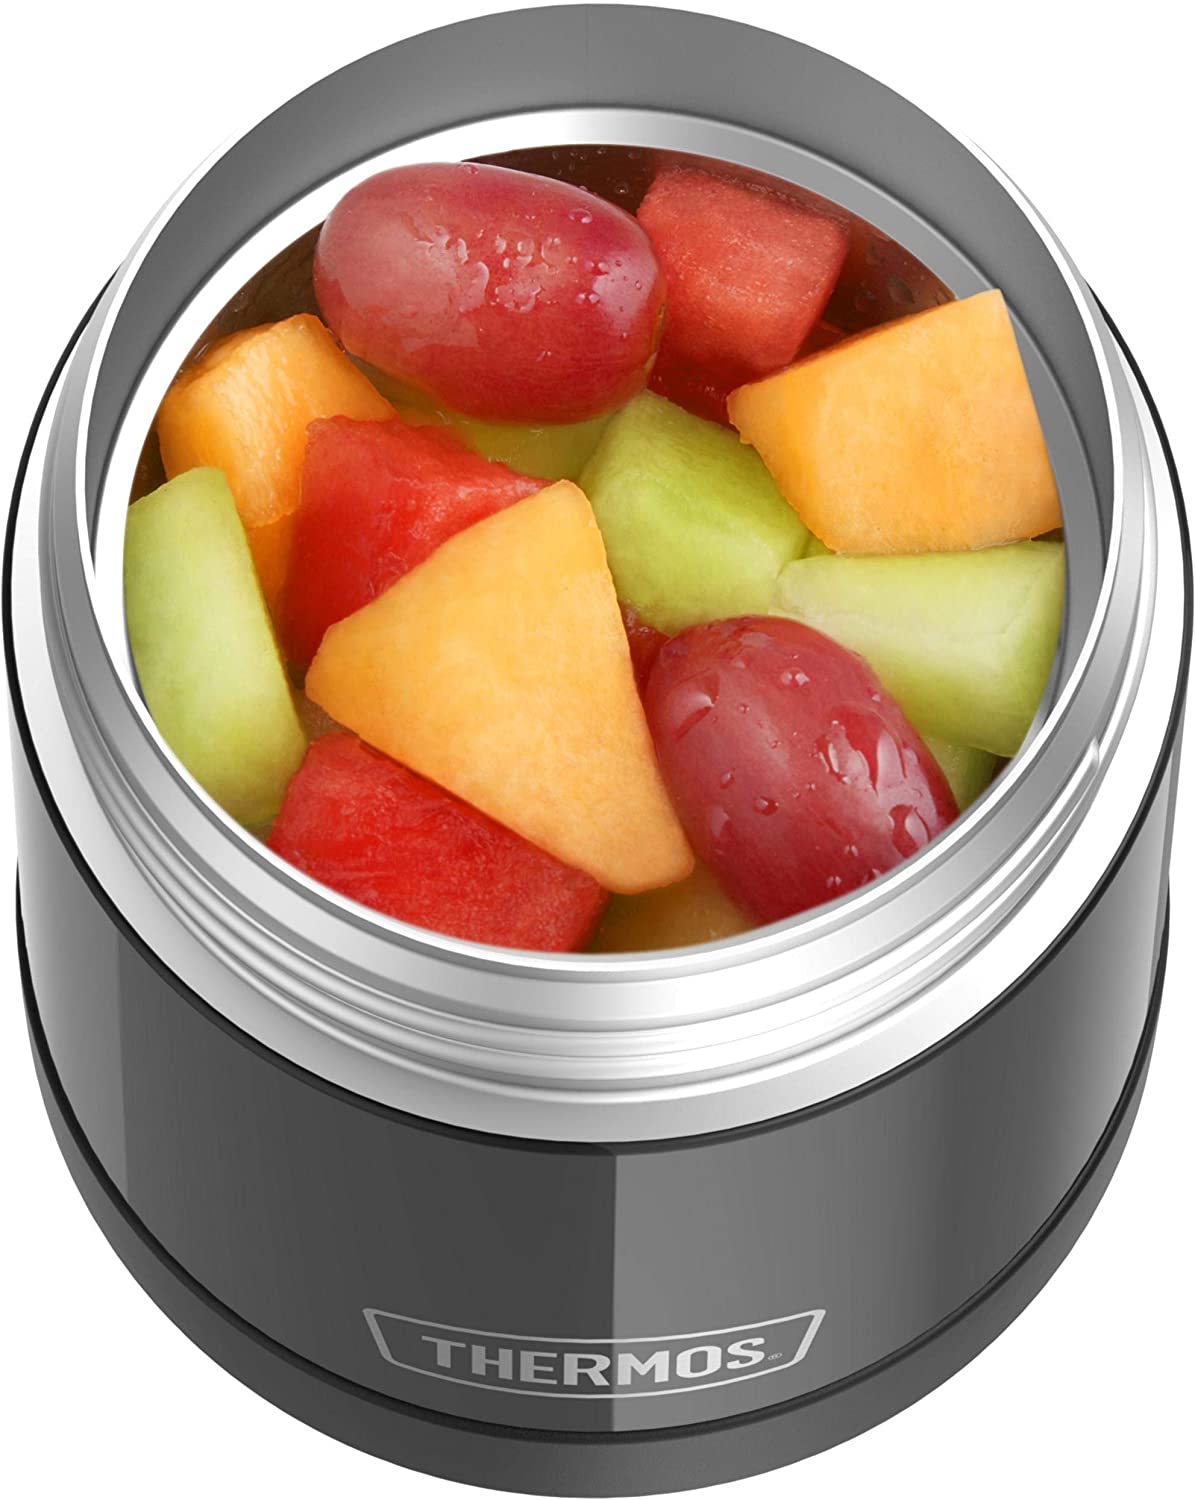 https://bigbigmart.com/wp-content/uploads/2021/11/THERMOS-FUNTAINER-10-Ounce-Stainless-Steel-Vacuum-Insulated-Kids-Food-Jar-with-Folding-Spoon-Black4.jpg